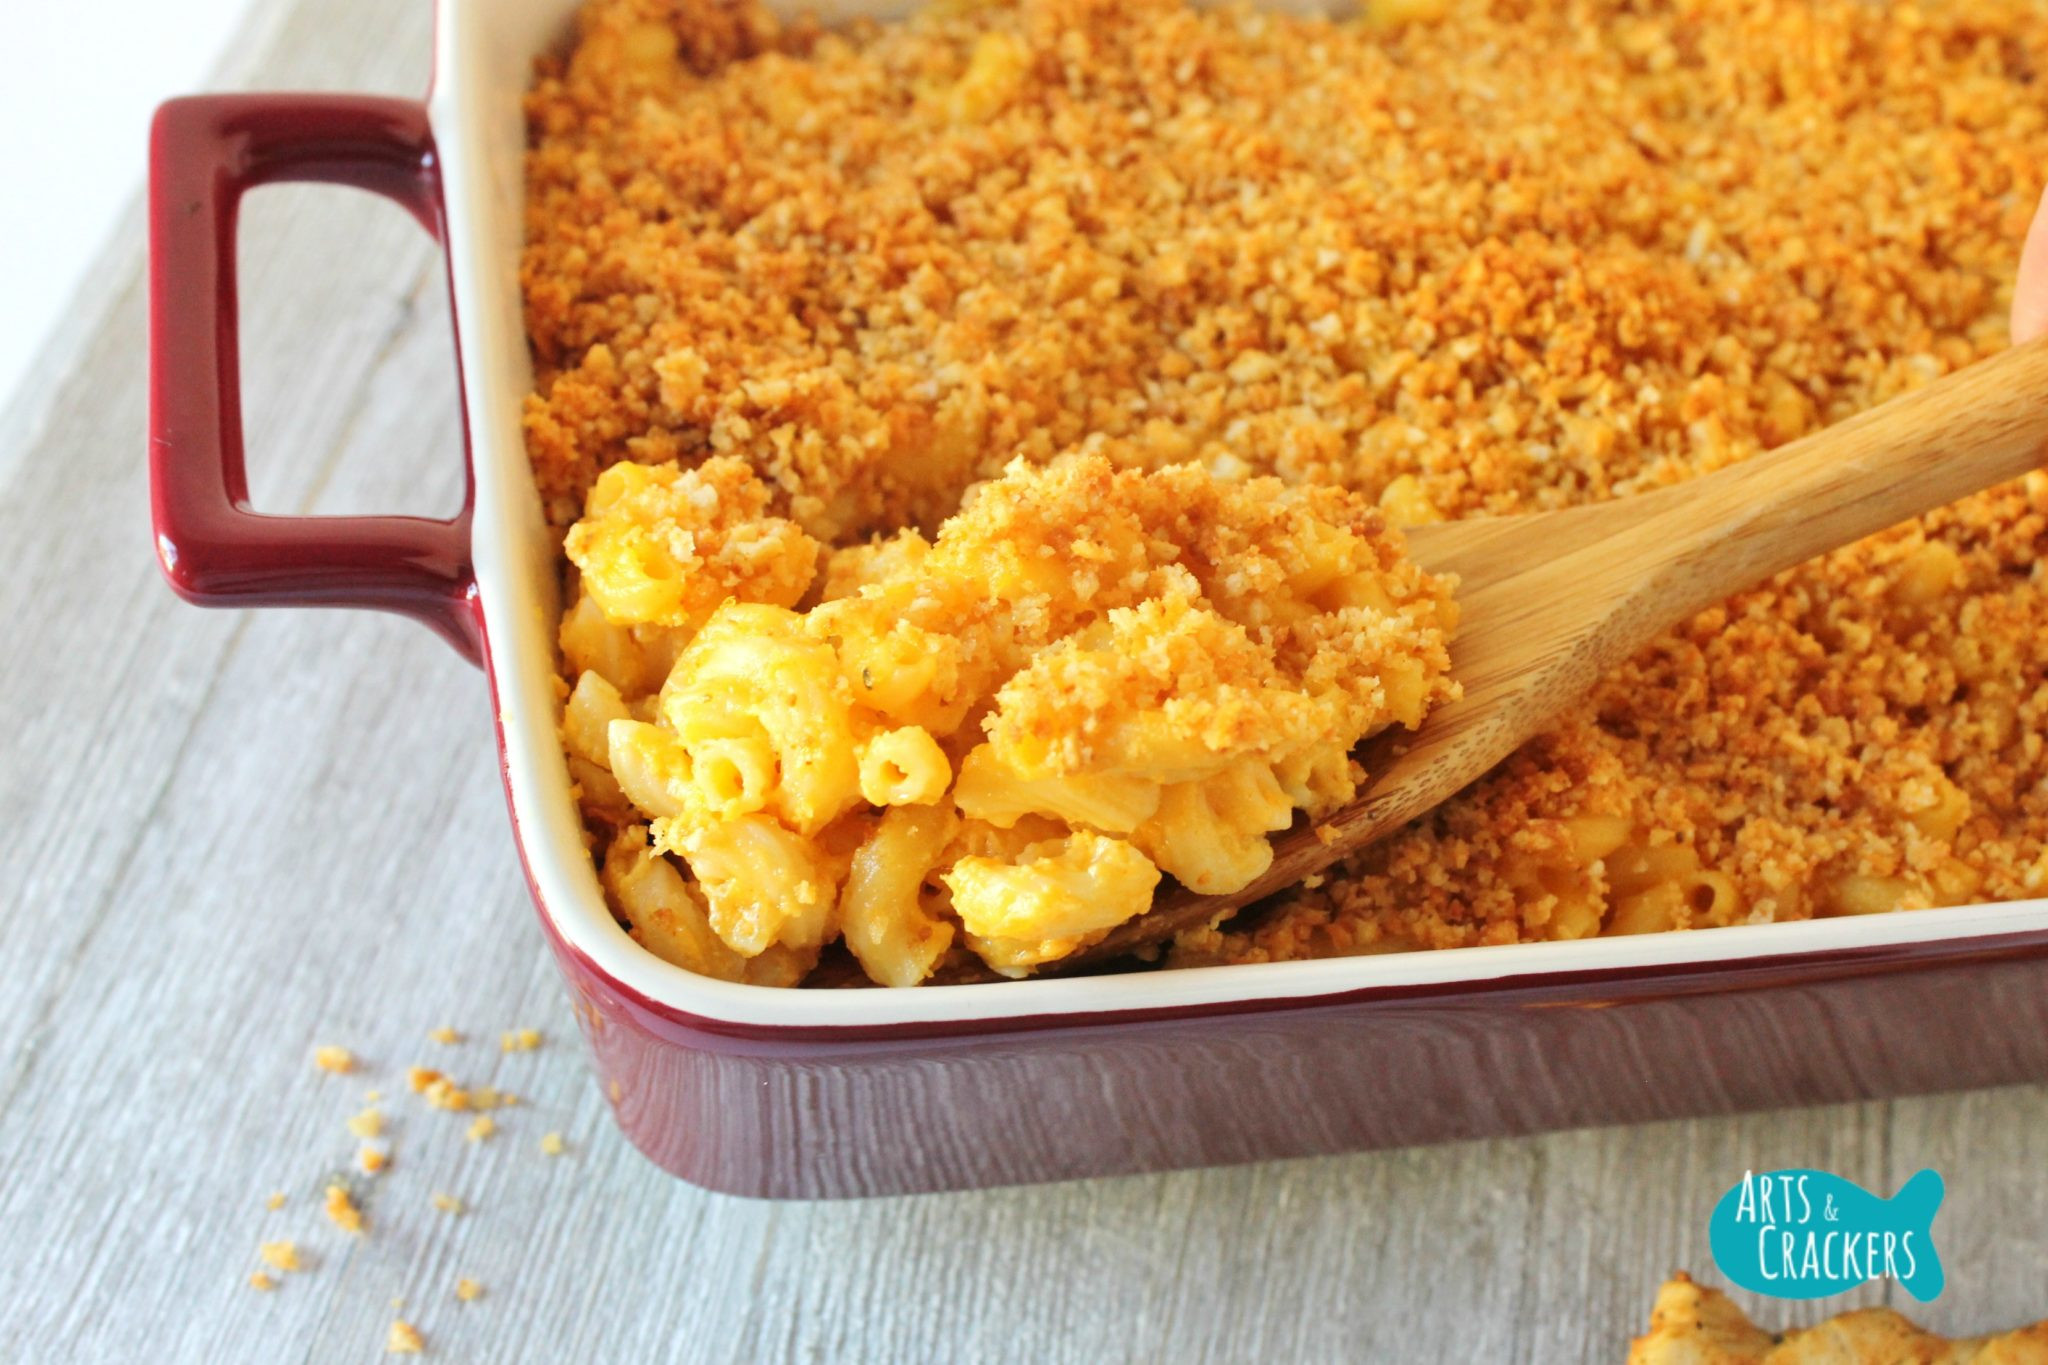 Baked Macaroni And Cheese With Bread Crumbs Recipe
 Everyday Macaroni And Cheese With Crispy Crumb Topping